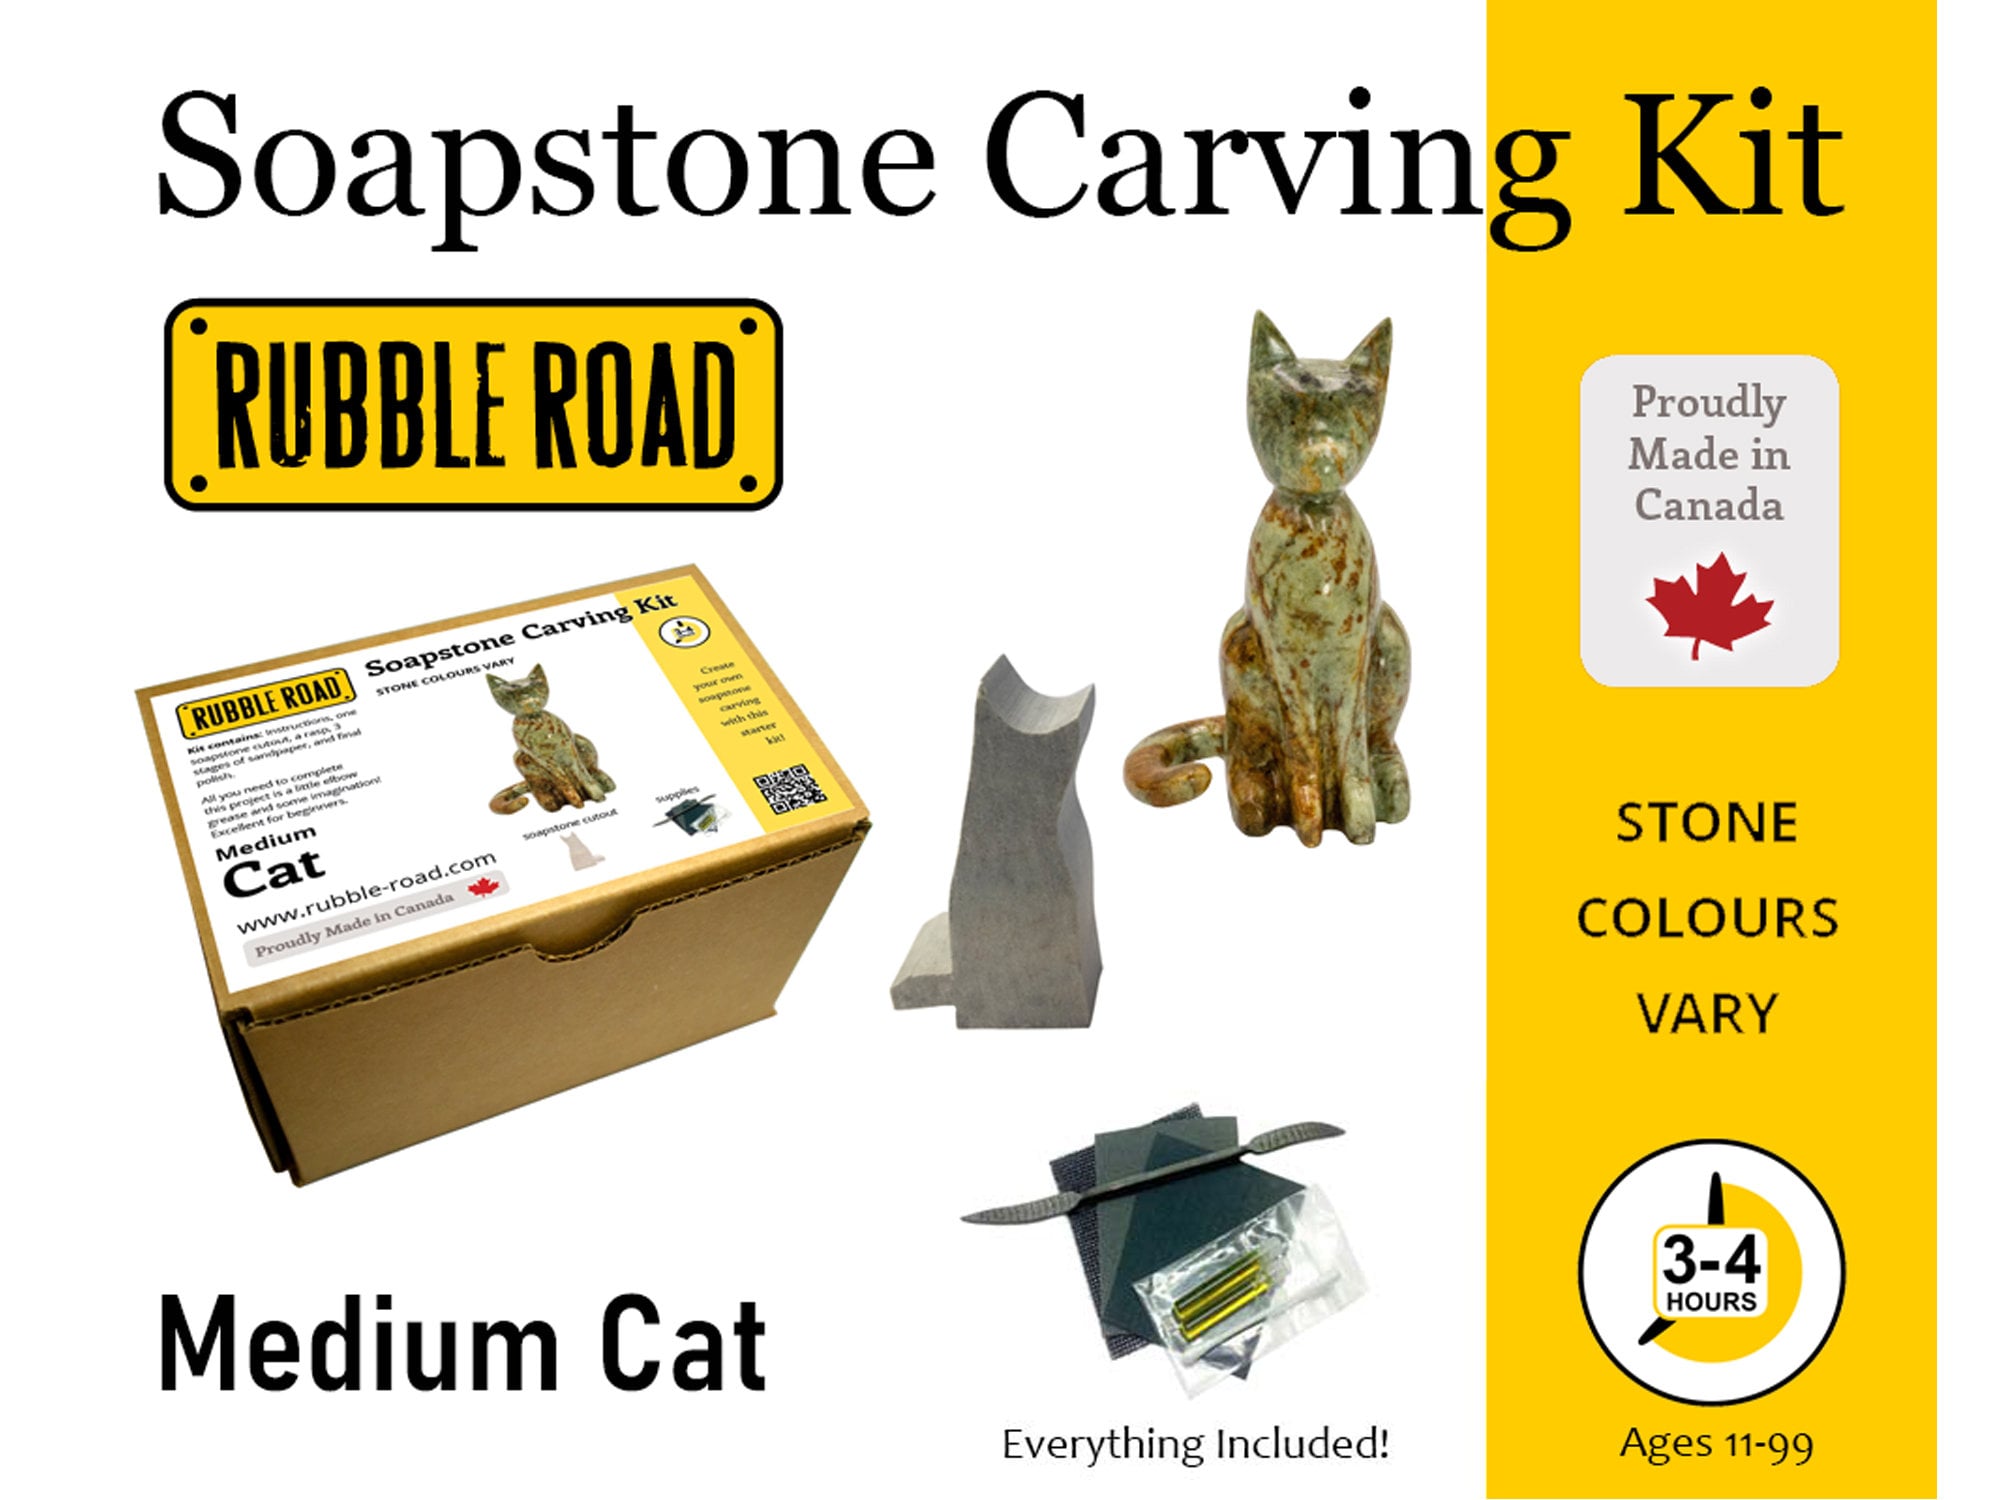 Soapstone Carving Kit and Whittling, Carve Your Own Sculpture, 1